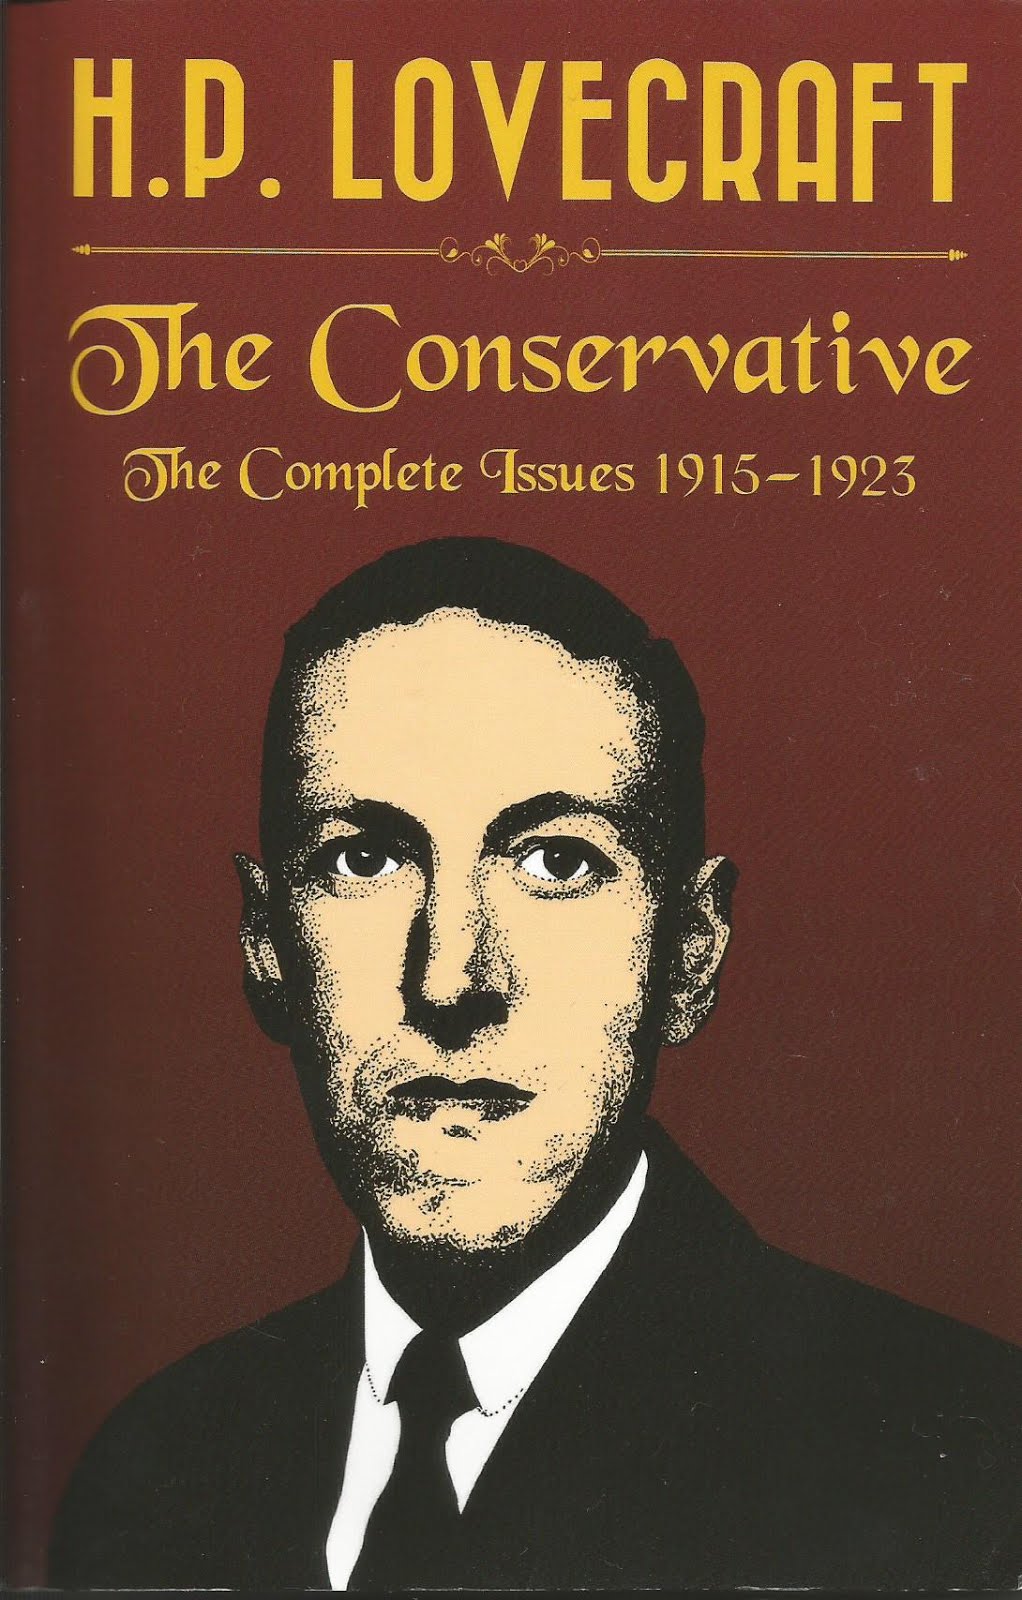 Currently Reading this book:  H.P. Lovecraft's The Conservative